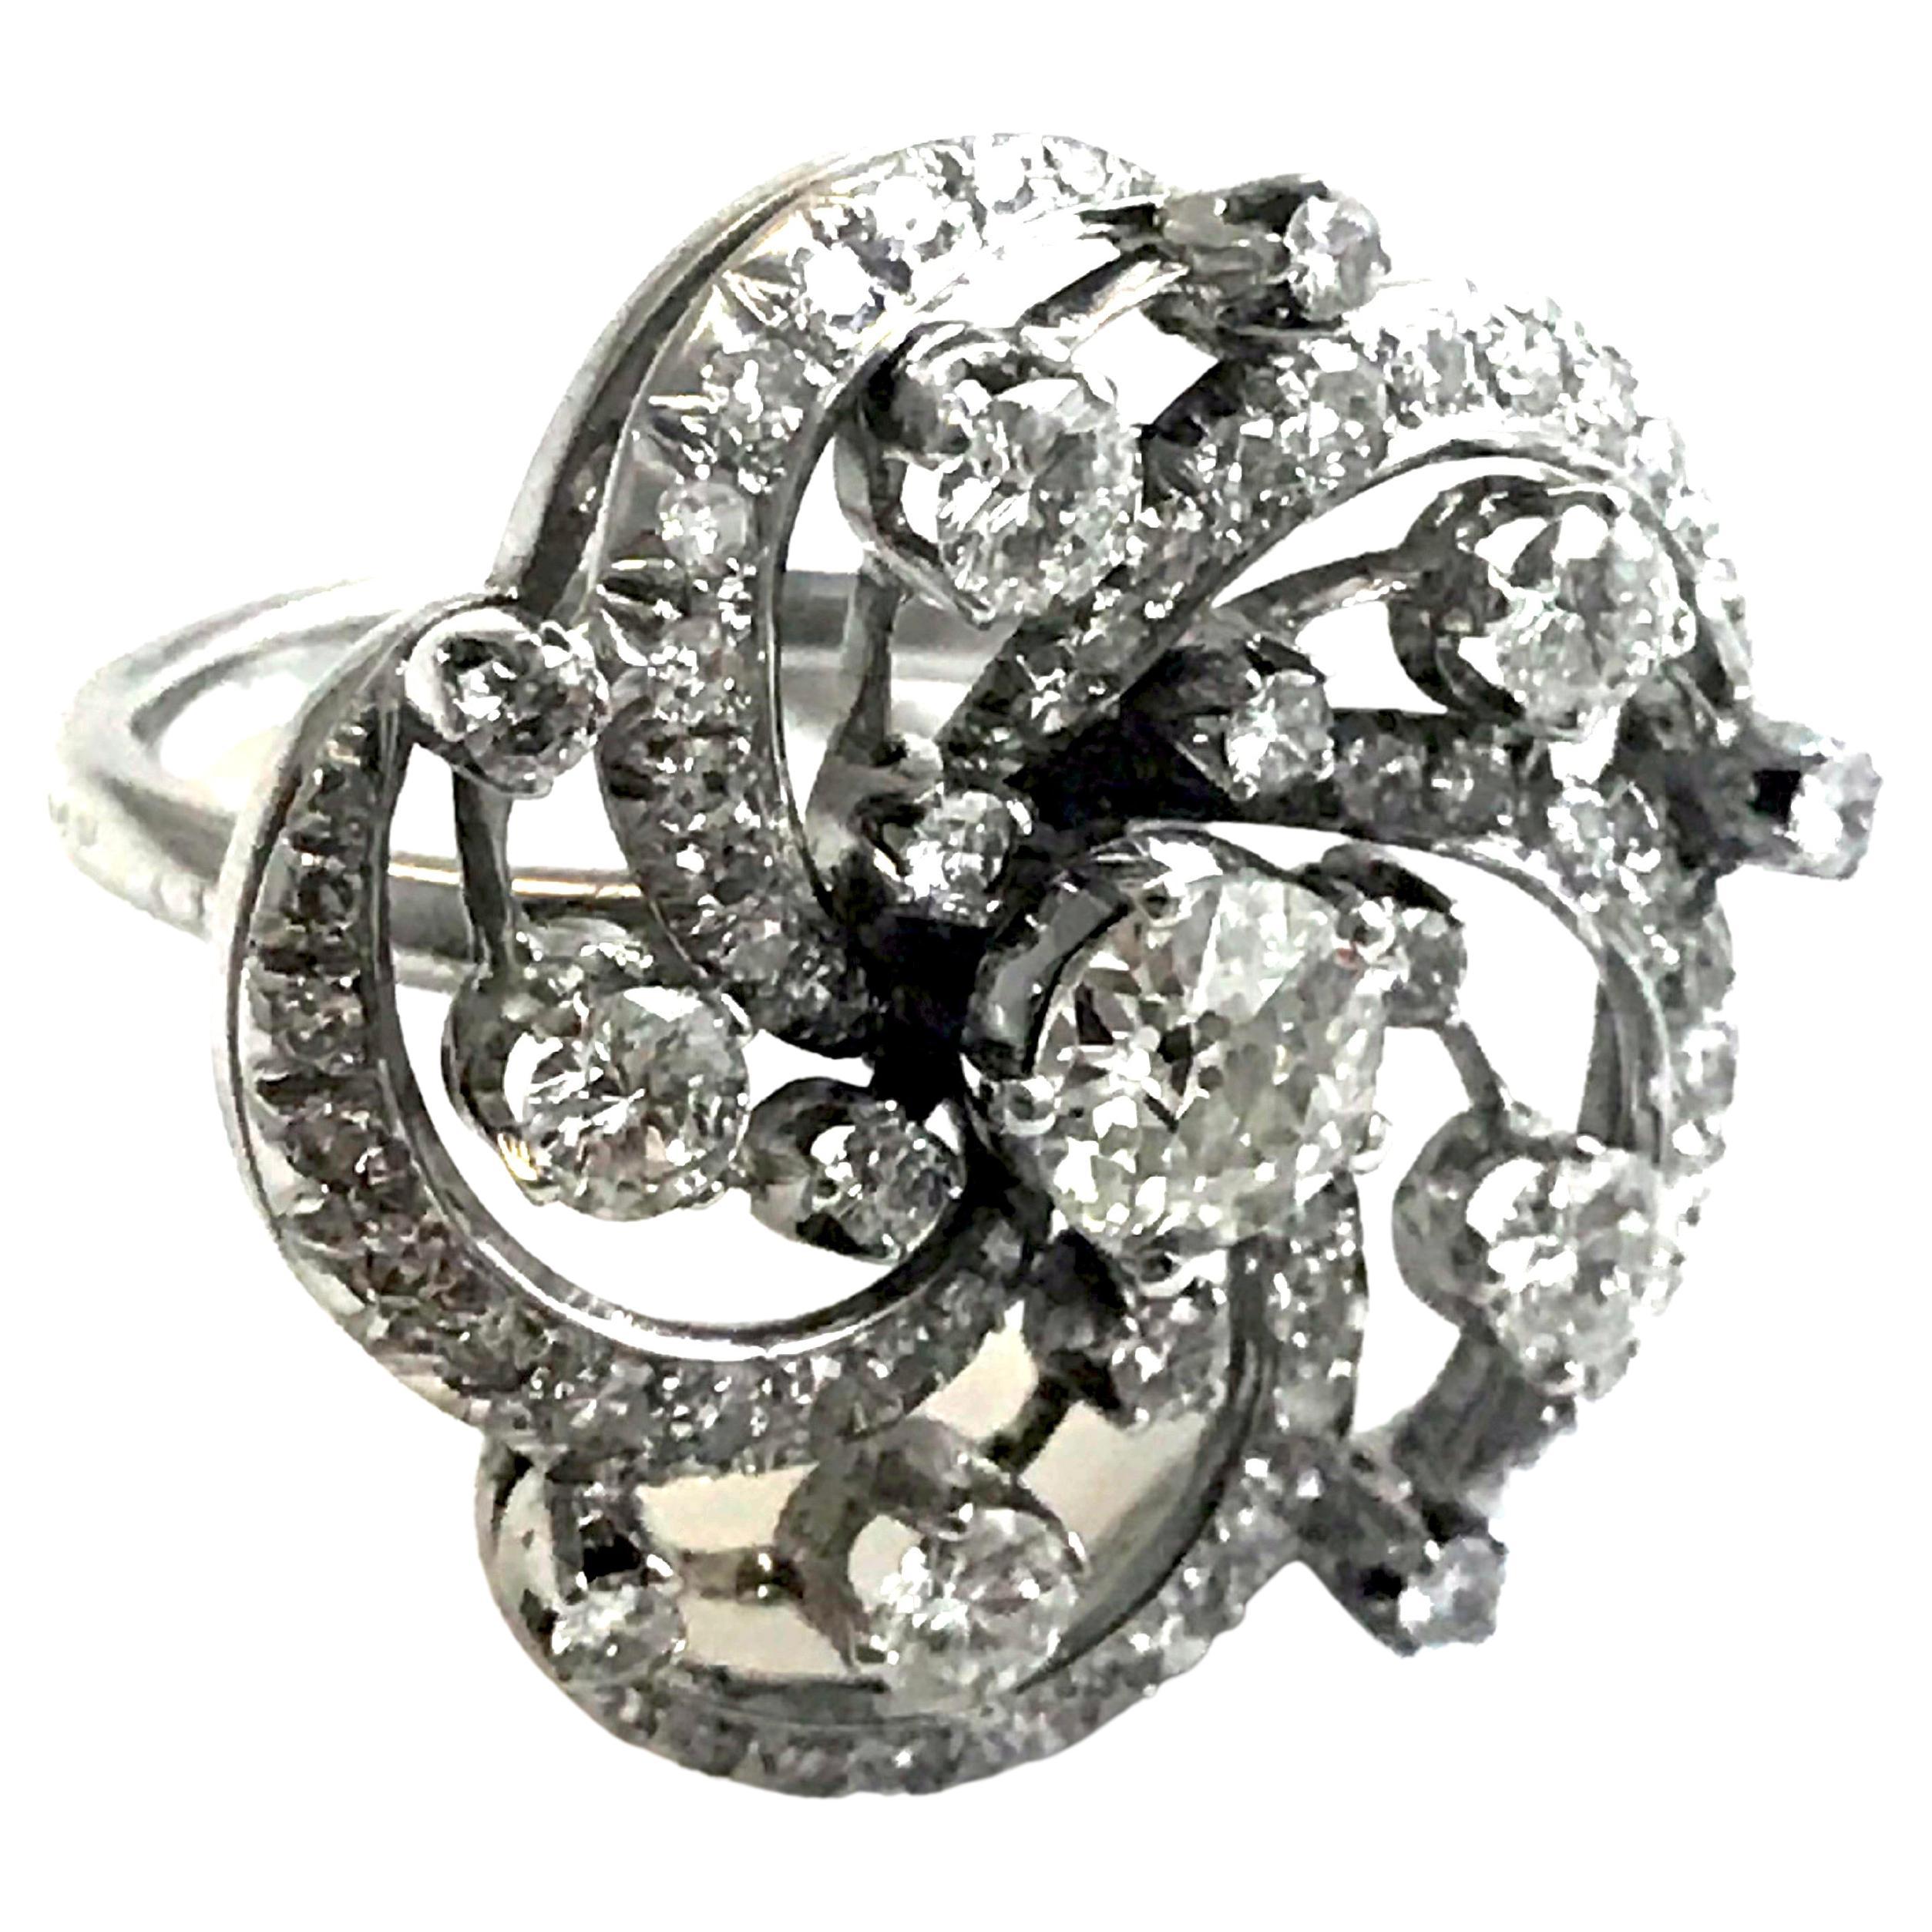 Italian diamonds ring.
18K white gold
It comes with over 4,5 ct. of extra white diamonds.
The central stone is ct. 1,20; 5 stones between ct. 0,14 and ct. 0,18; 10 stones about ct. 0,10 each; 50 more stones for ct. 1,50 total.
Ring width 31 mm
Ring